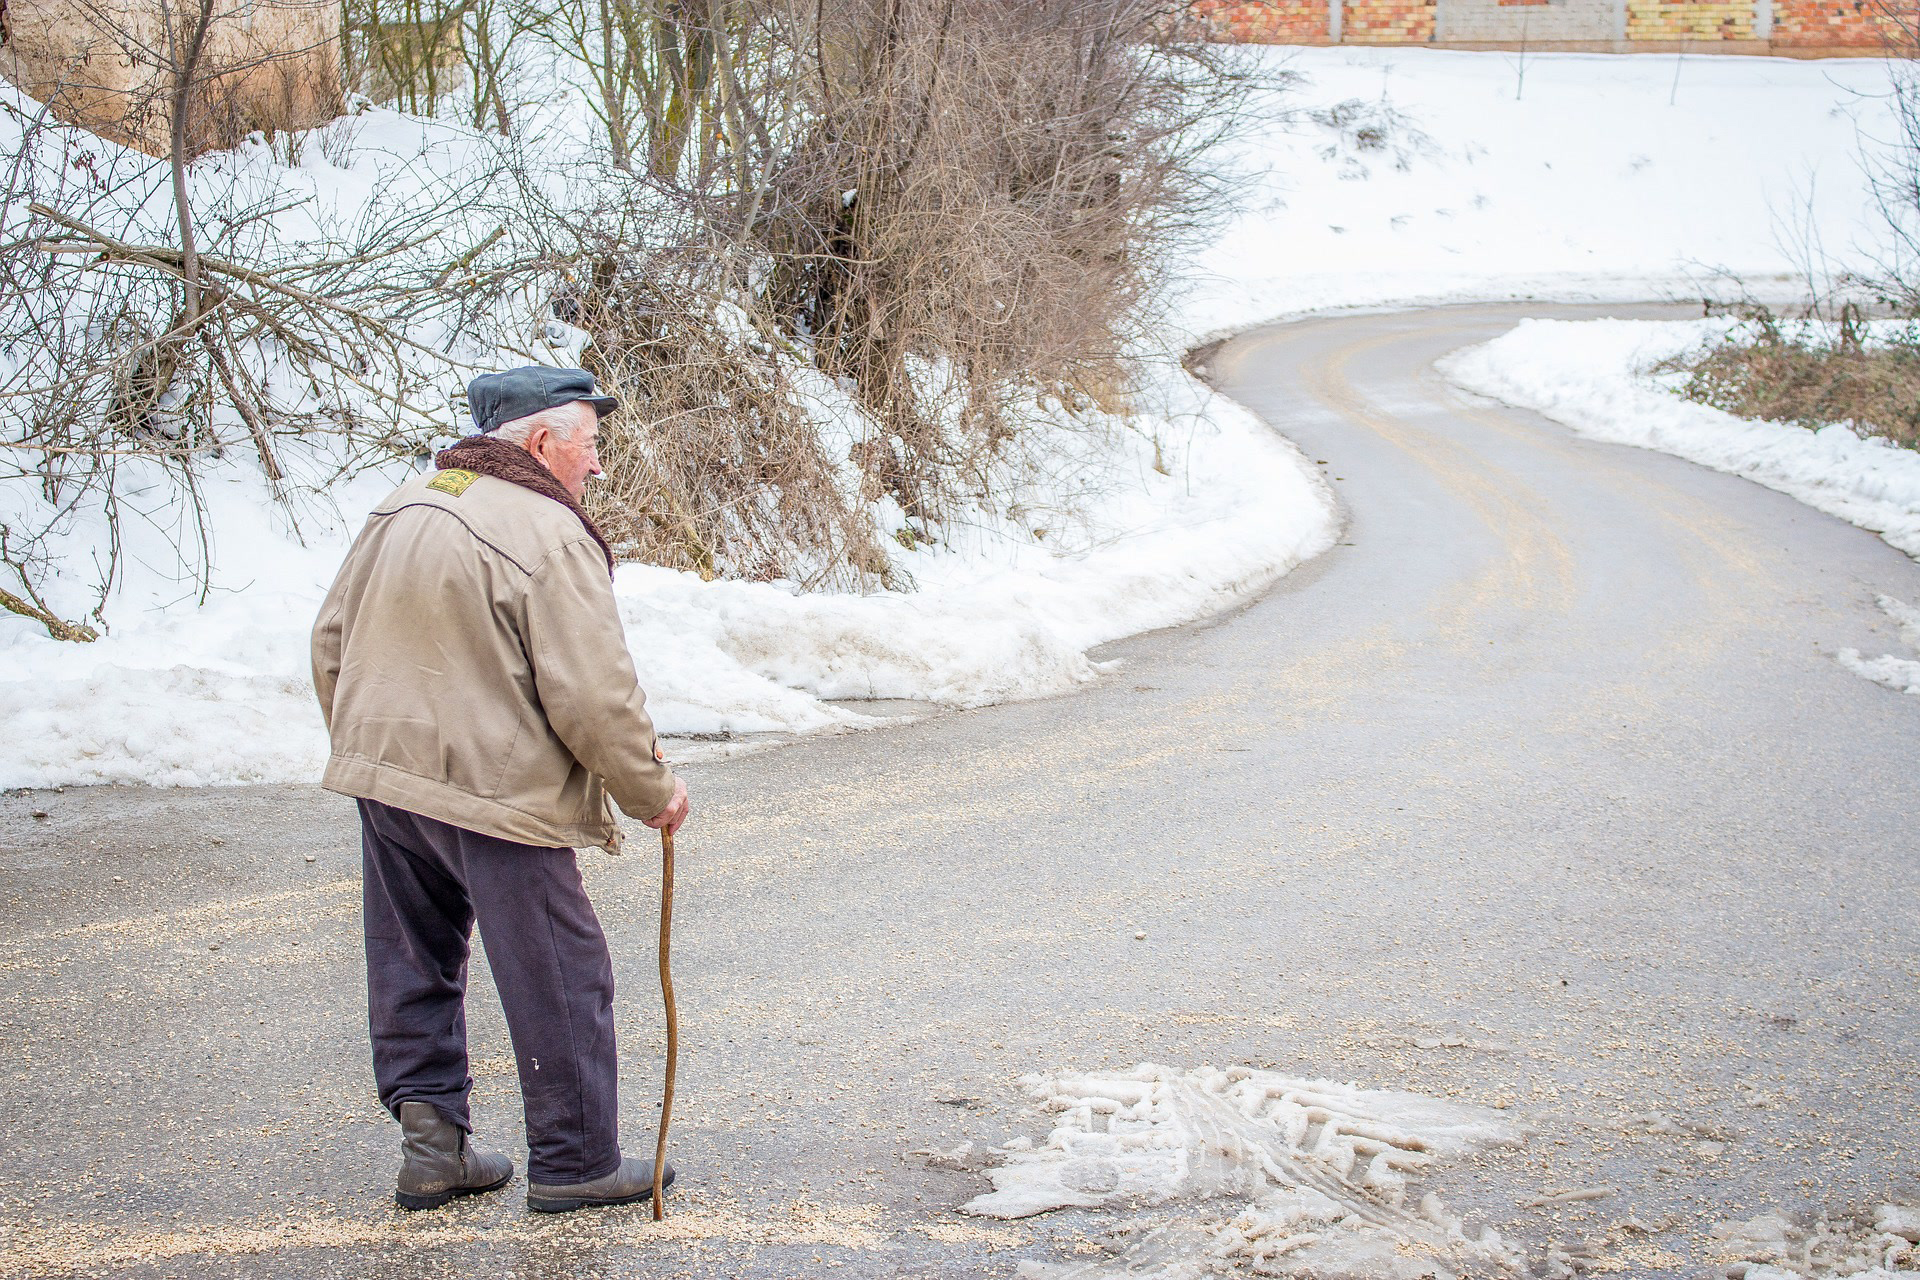 Elderly man with walking cane walks across icy road, which may result in a slip and fall injury.